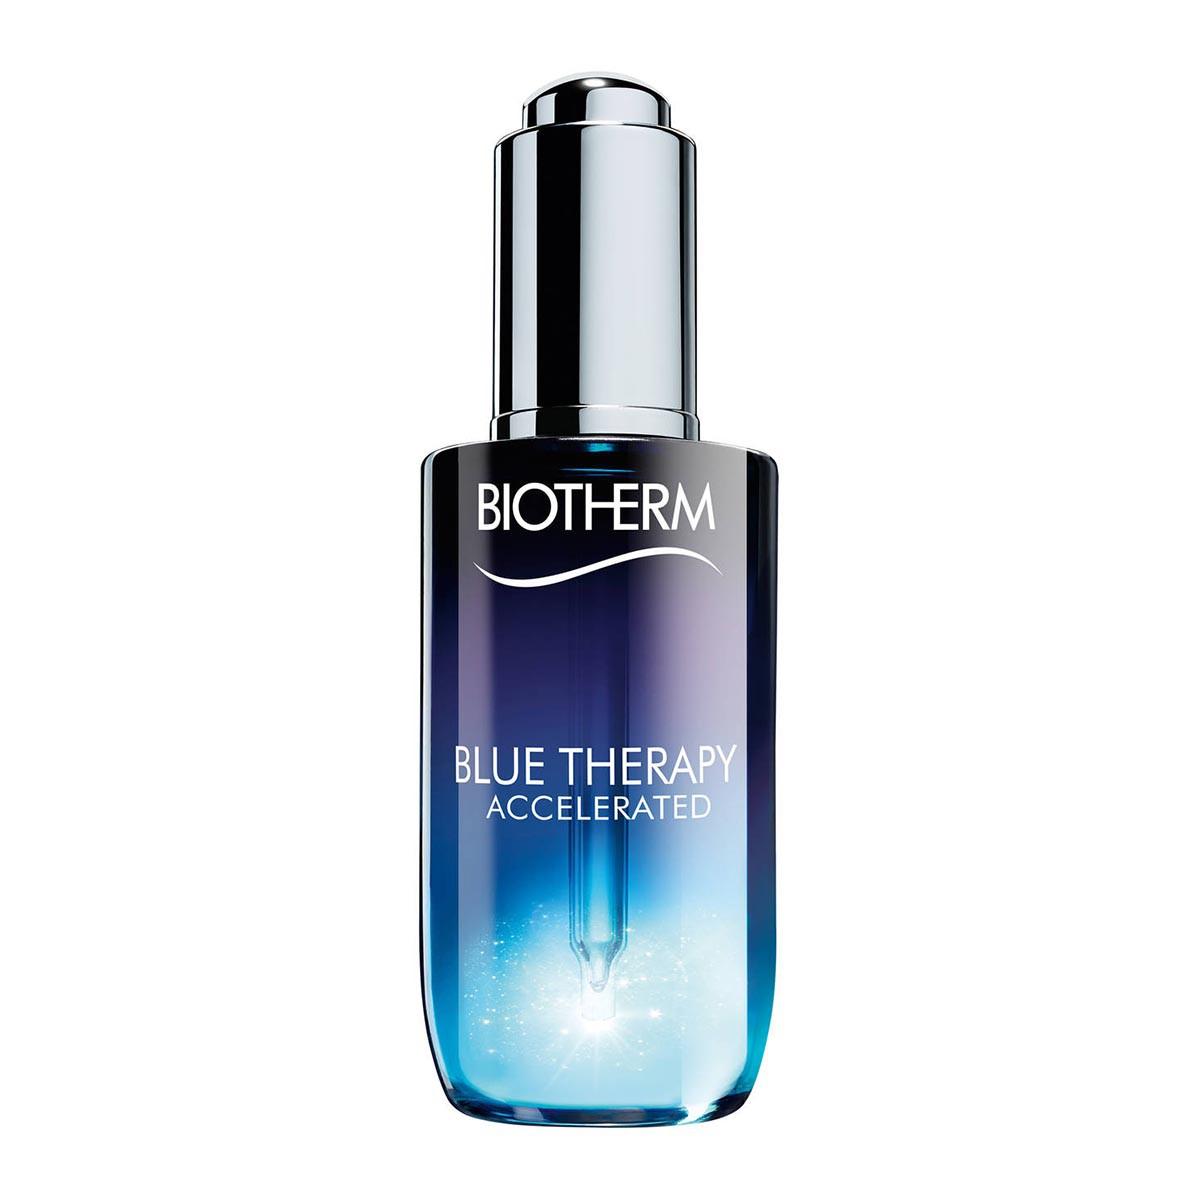 biotherm-tous-types-de-peau-blue-therapy-accelerated-50ml